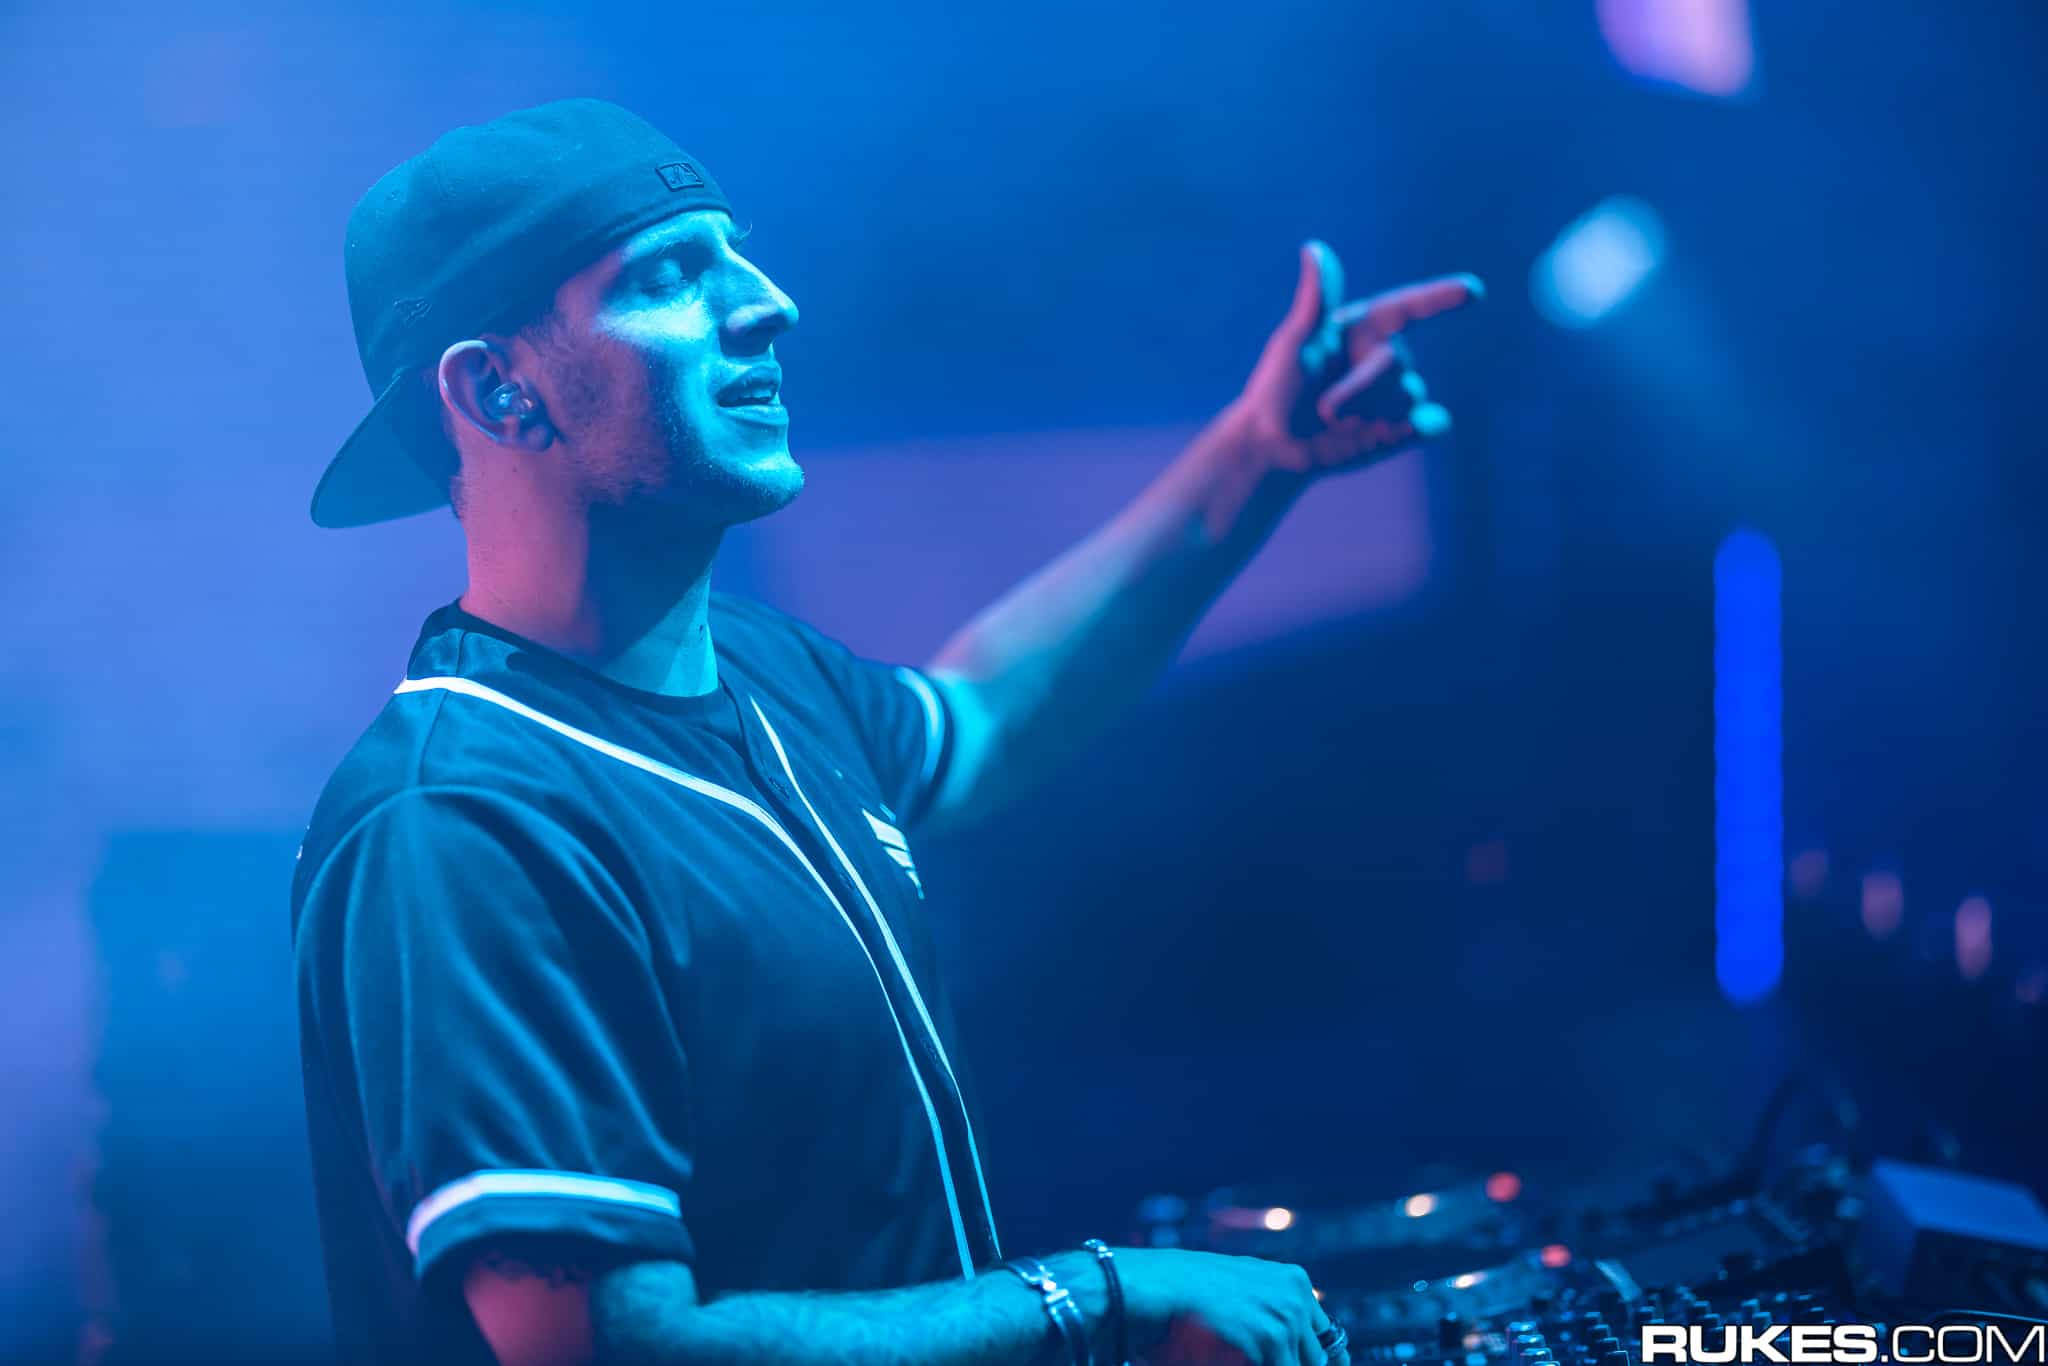 ILLENIUM teams up with pop talent MAX for moving single “Worst Day”: Listen